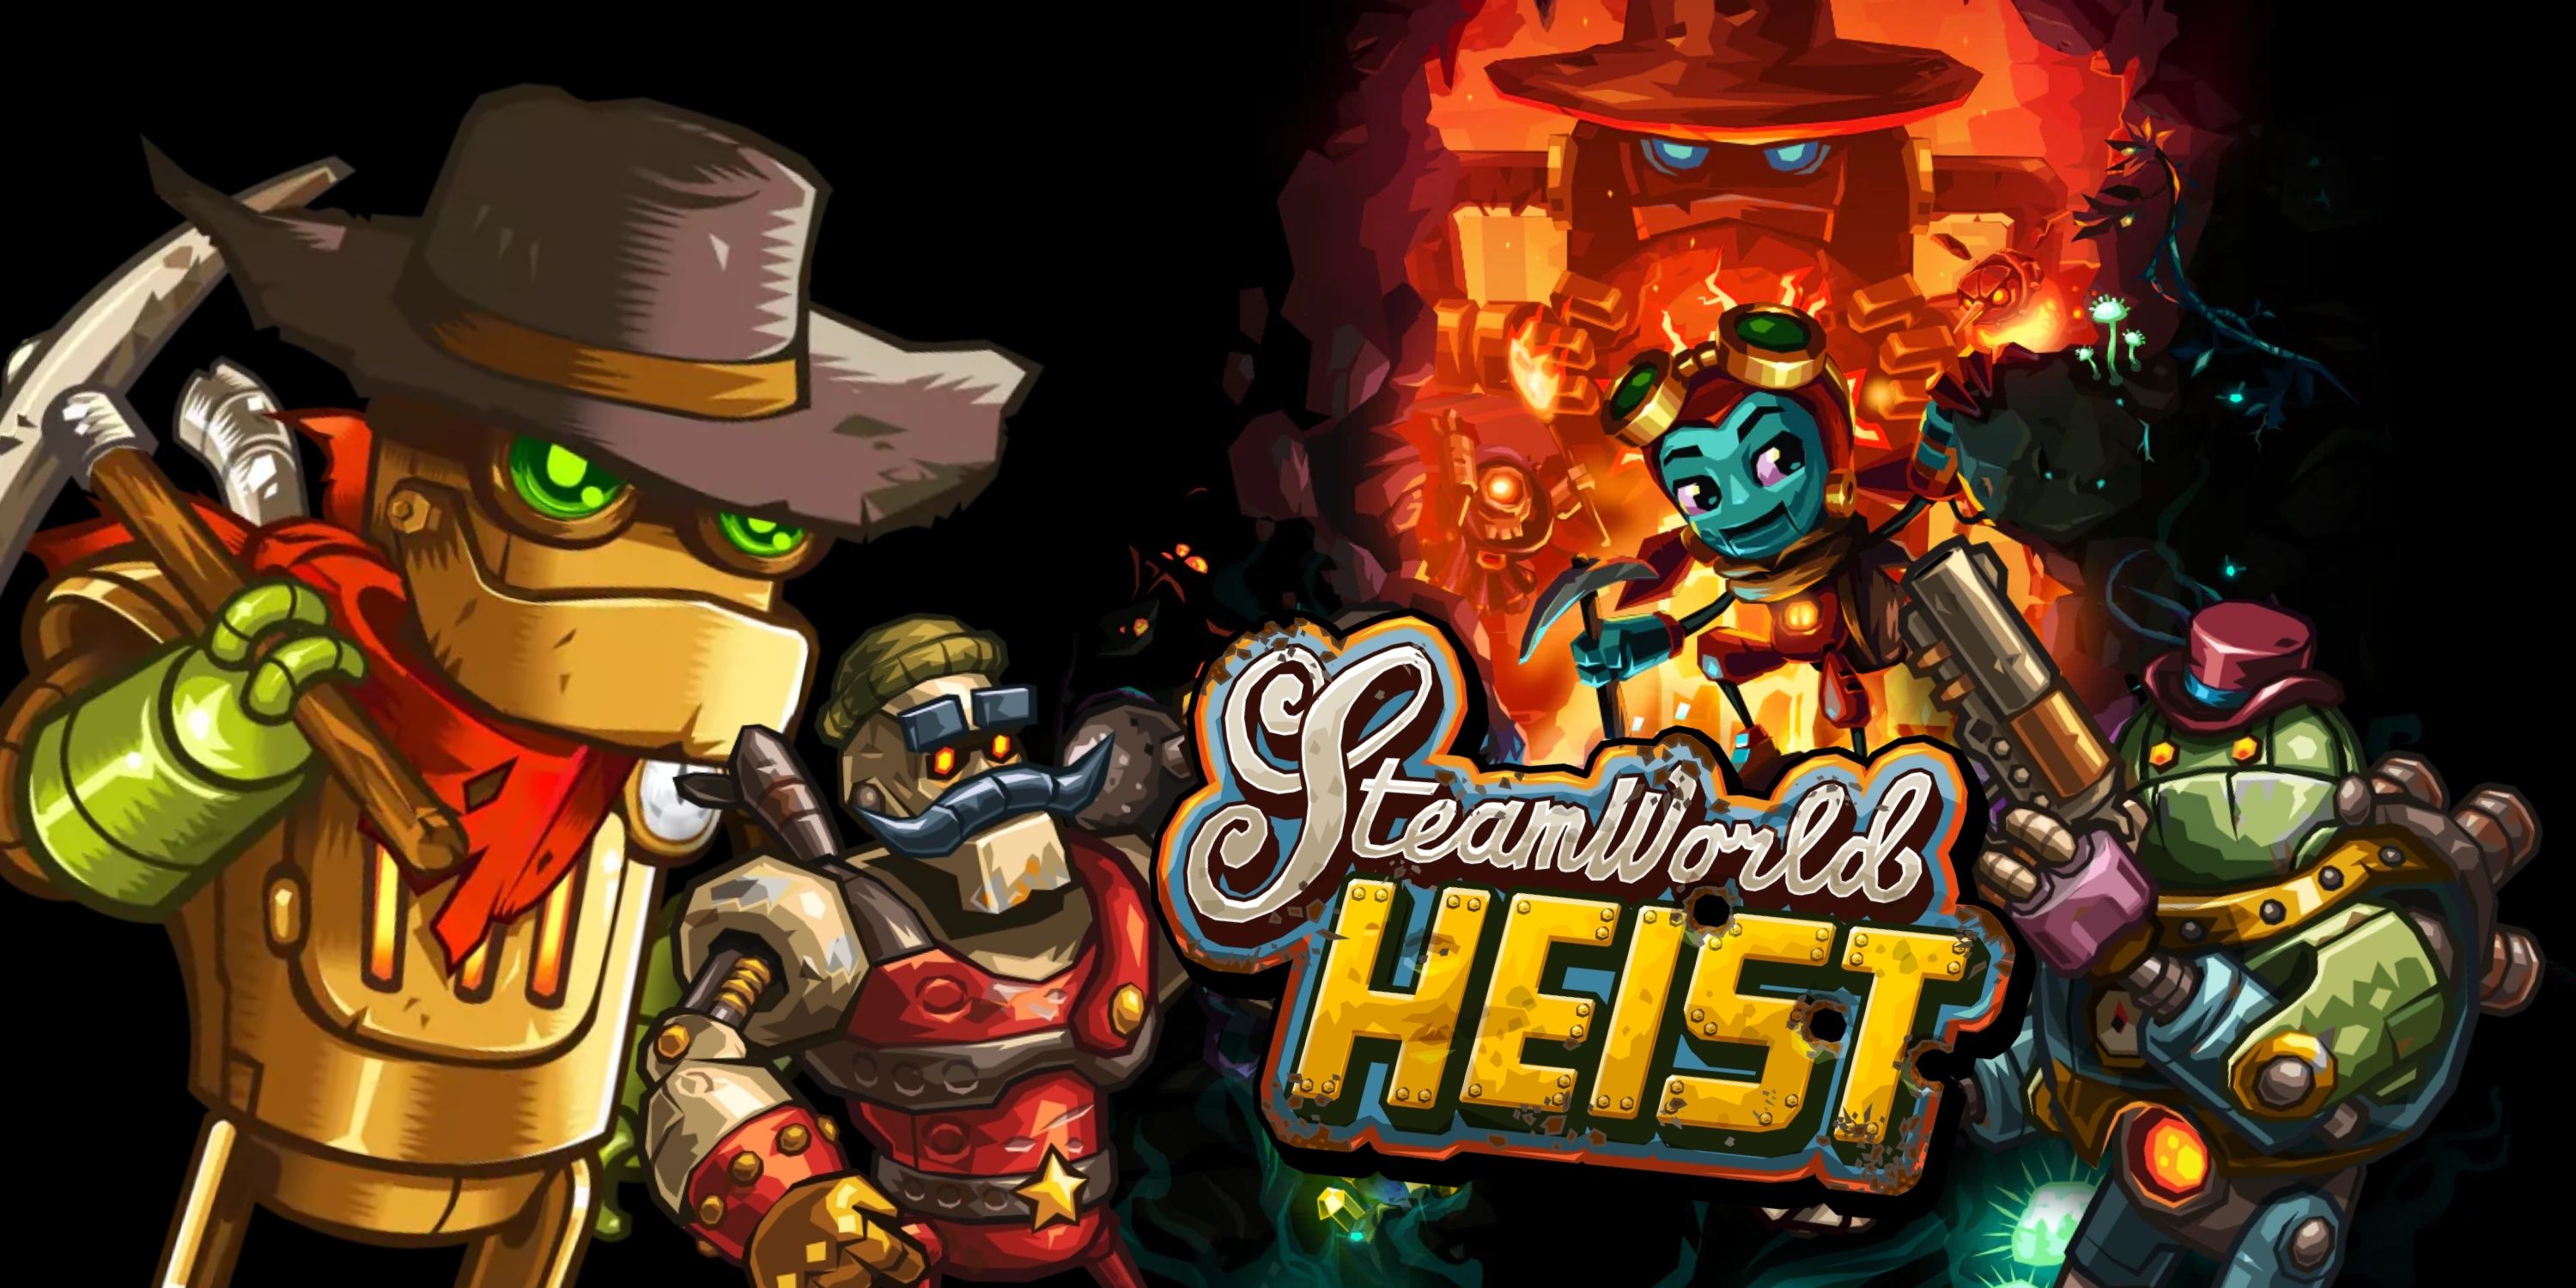 Every SteamWorld Game, Ranked (Featured Image) - SteamWorld Dig + SteamWorld Dig 2 + SteamWorld Heist